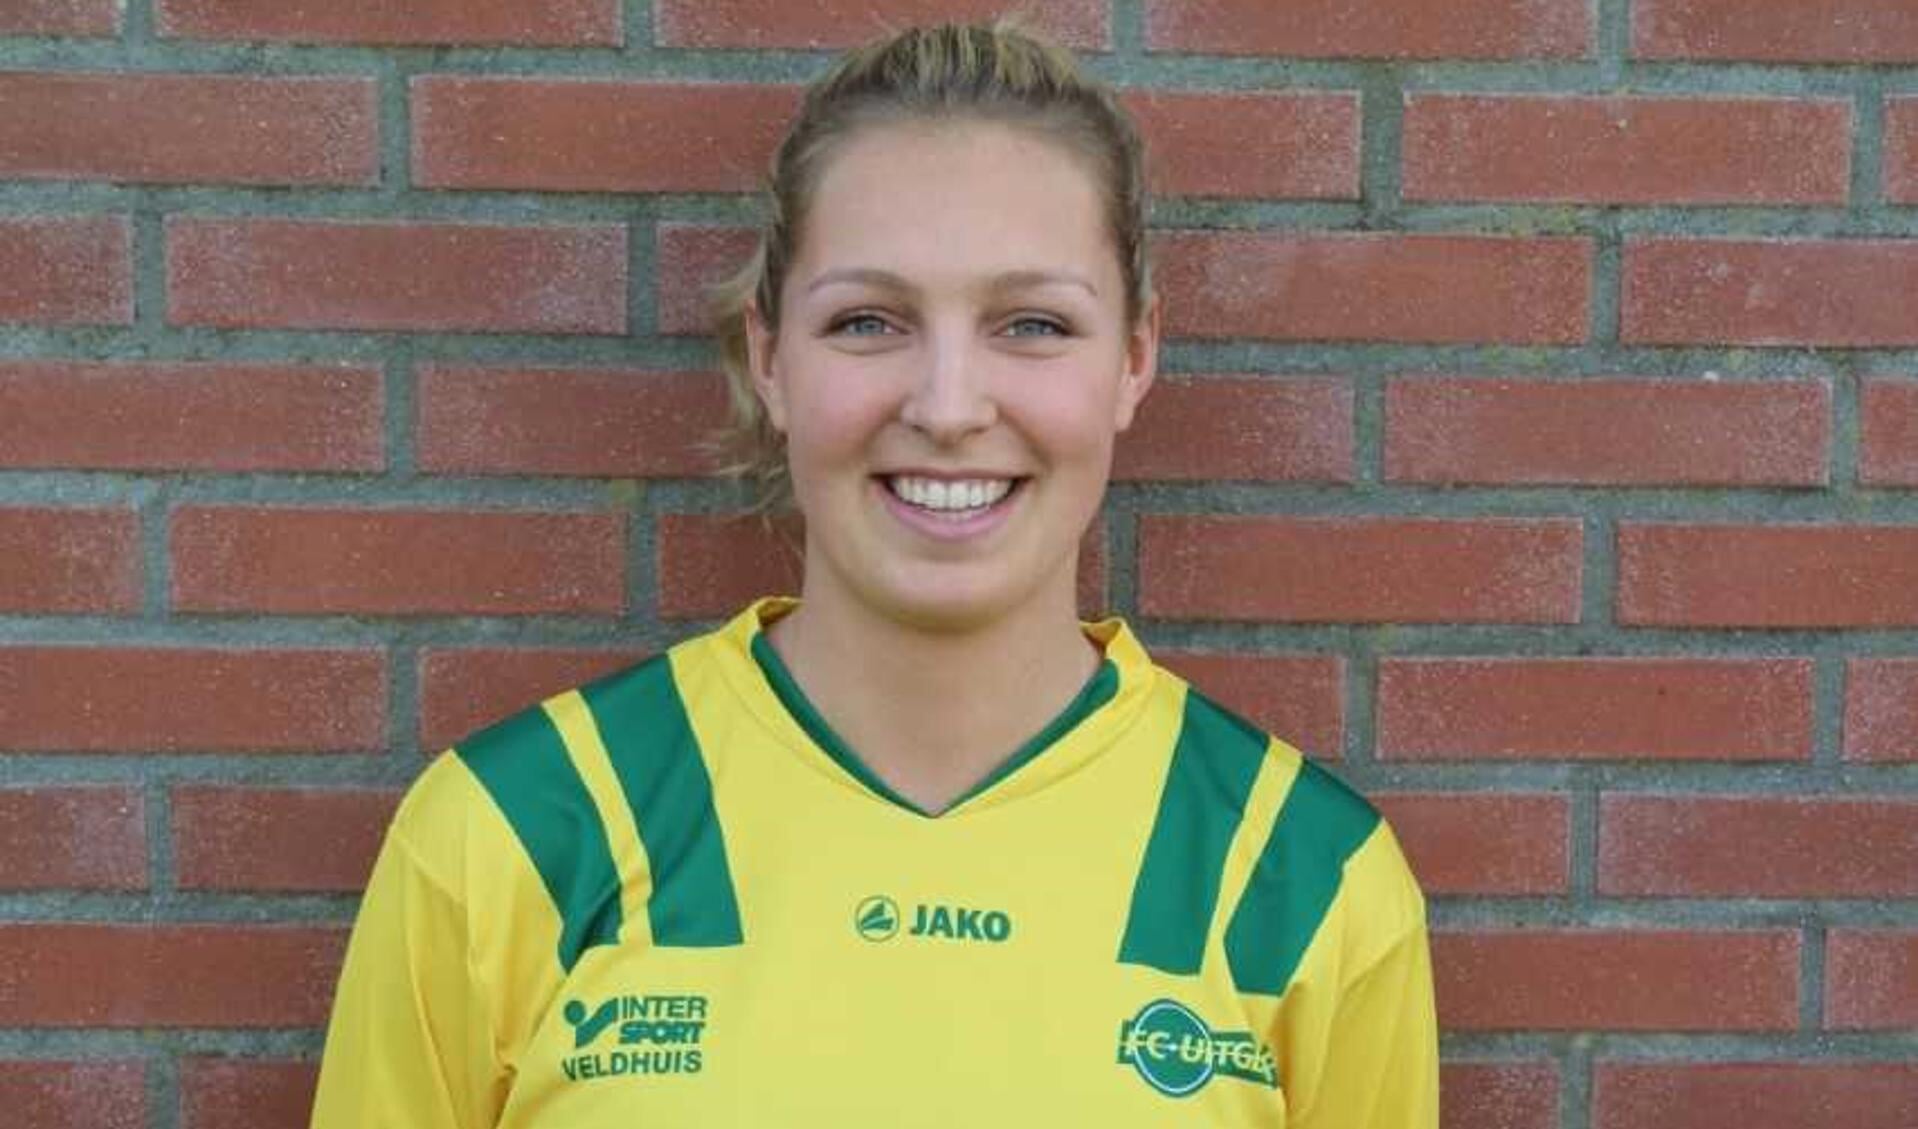 Woman of the match: Roos Vrouwe